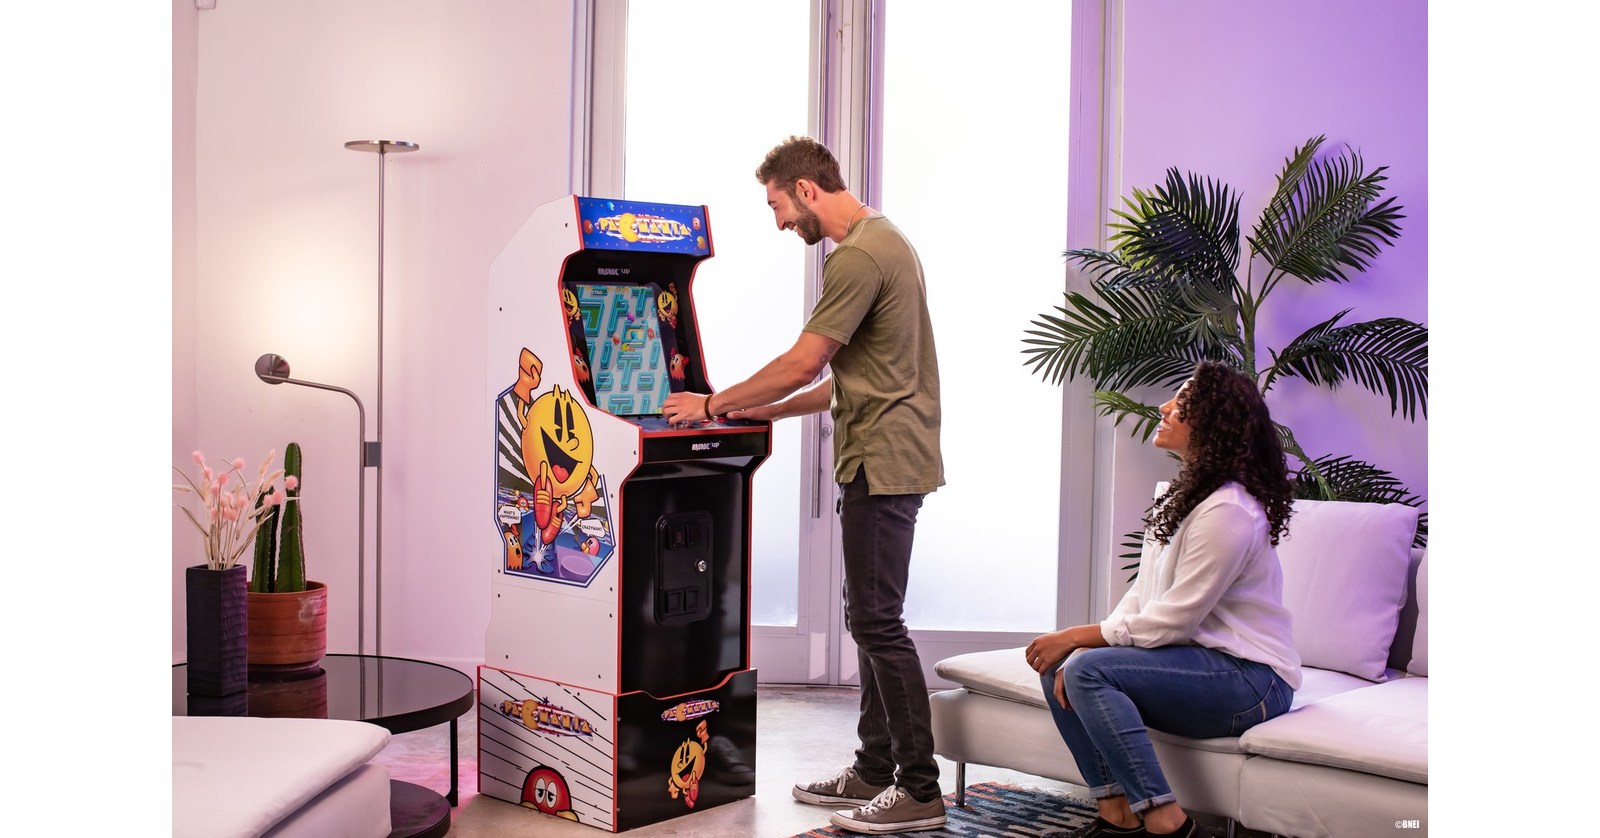 ARCADE1UP ANNOUNCES FIRST AT-HOME CASINO GAMING EXPERIENCE WITH THE  RENOWNED GAME SHOW